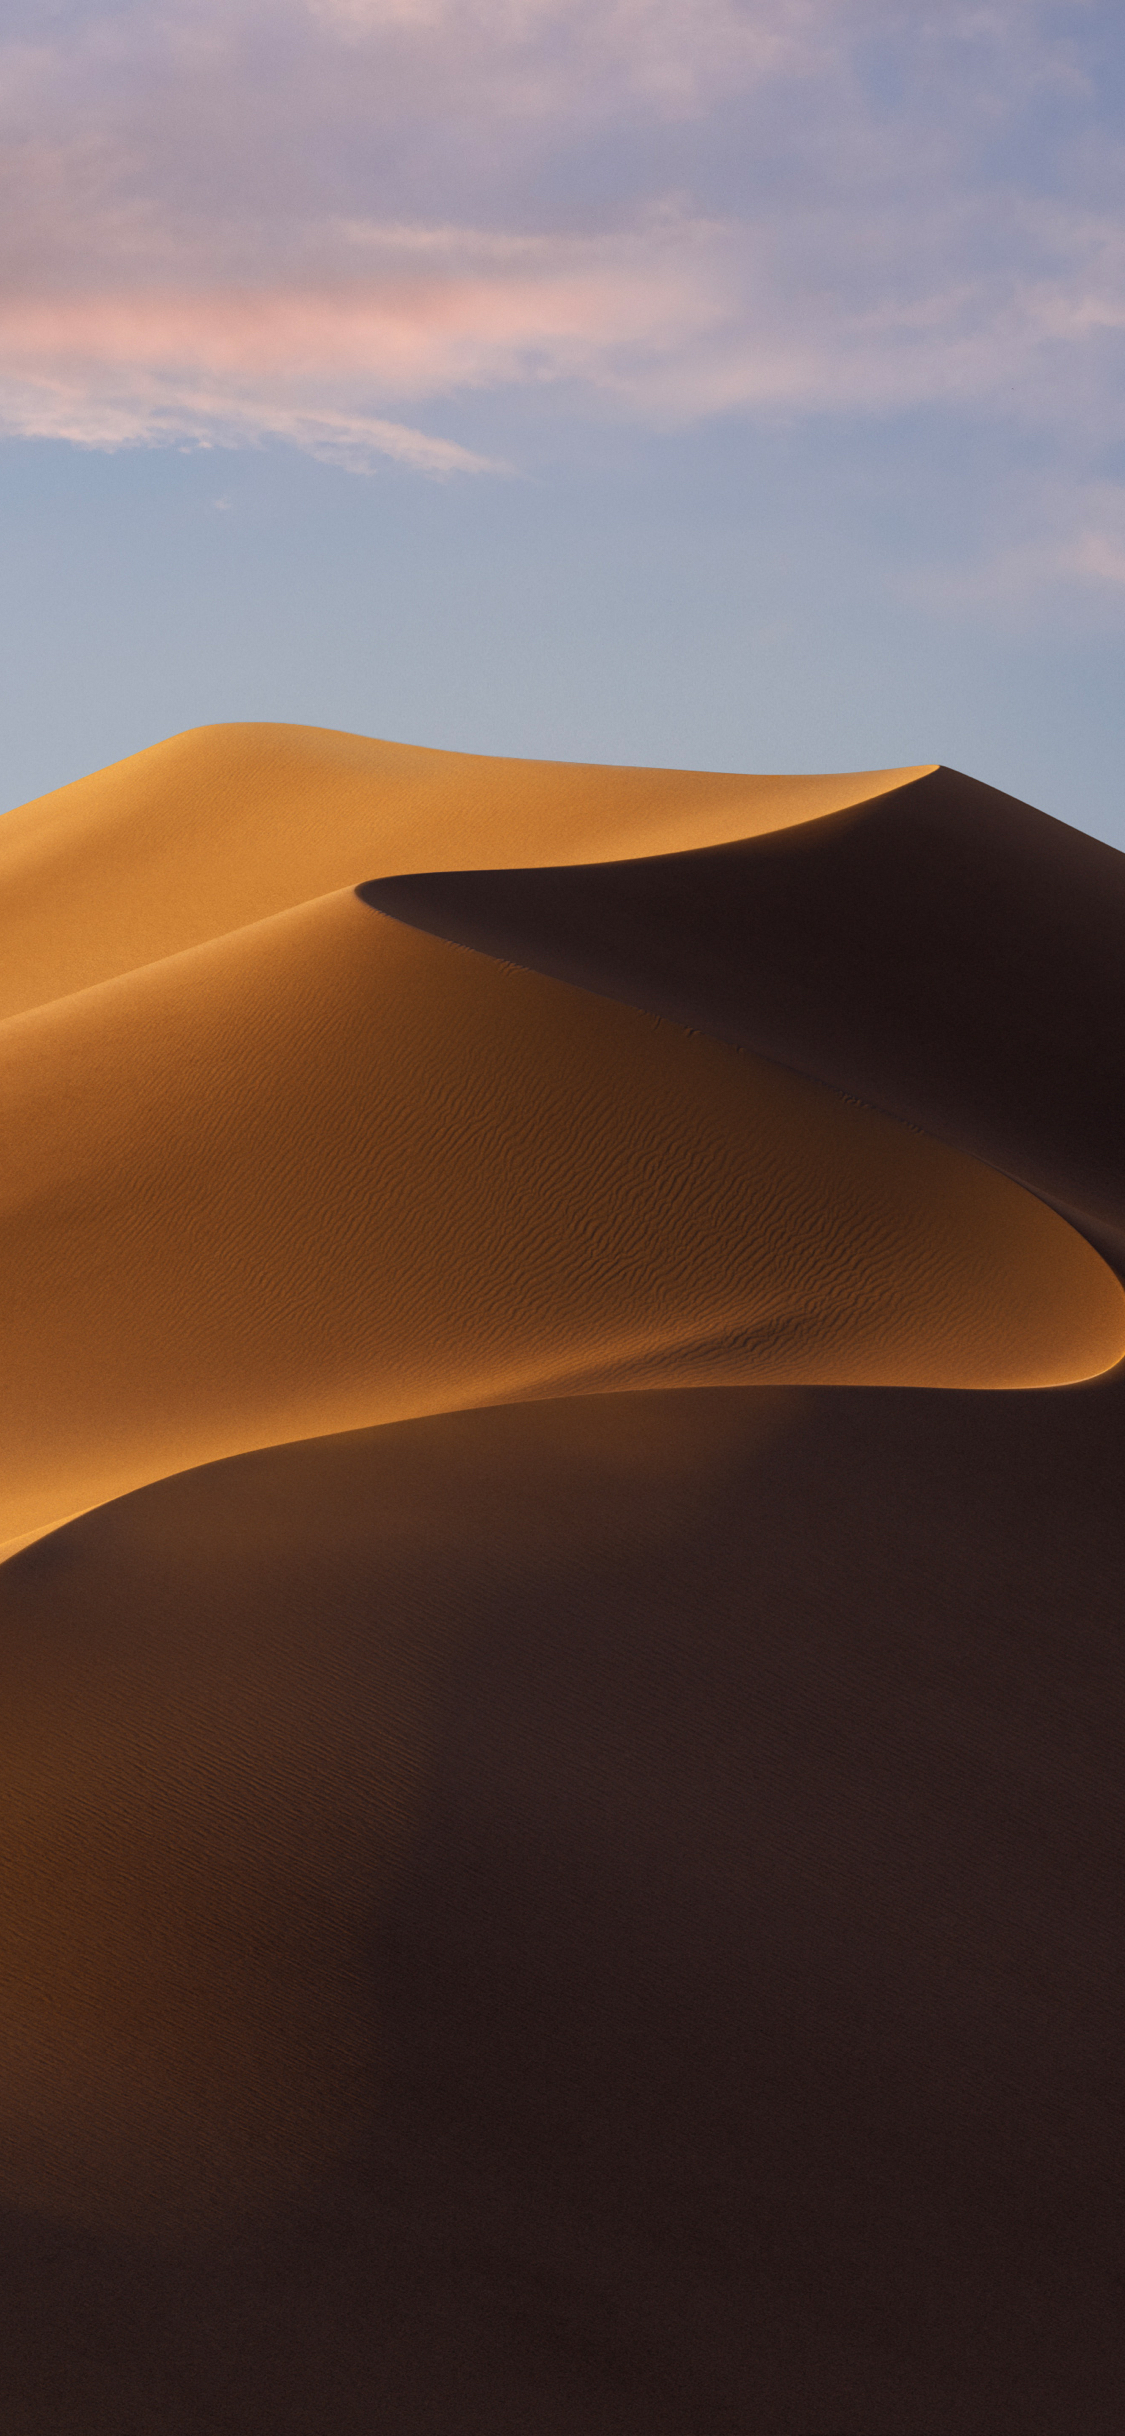 Download macOS Mojave wallpapers for desktop and iPhone